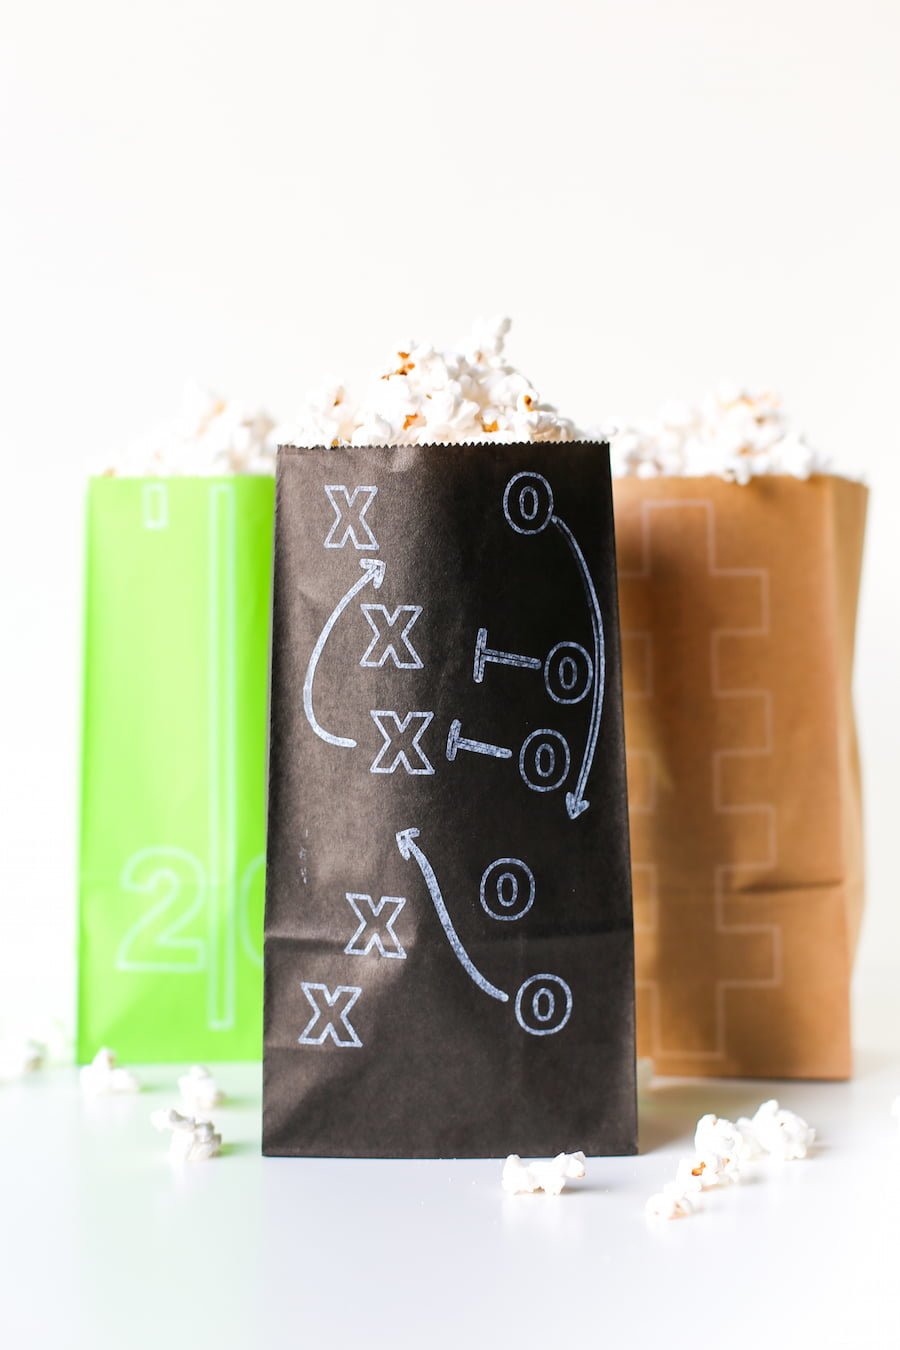 DIY Superbowl Popcorn Treat Bags made with the Cricut, Football Party, DIY Football Party Decorations, Free Football Themed SVG Cut Files, Gameday, Football Popcorn, Cricut Cutting Machine, Cricut DIY, Salty Canary